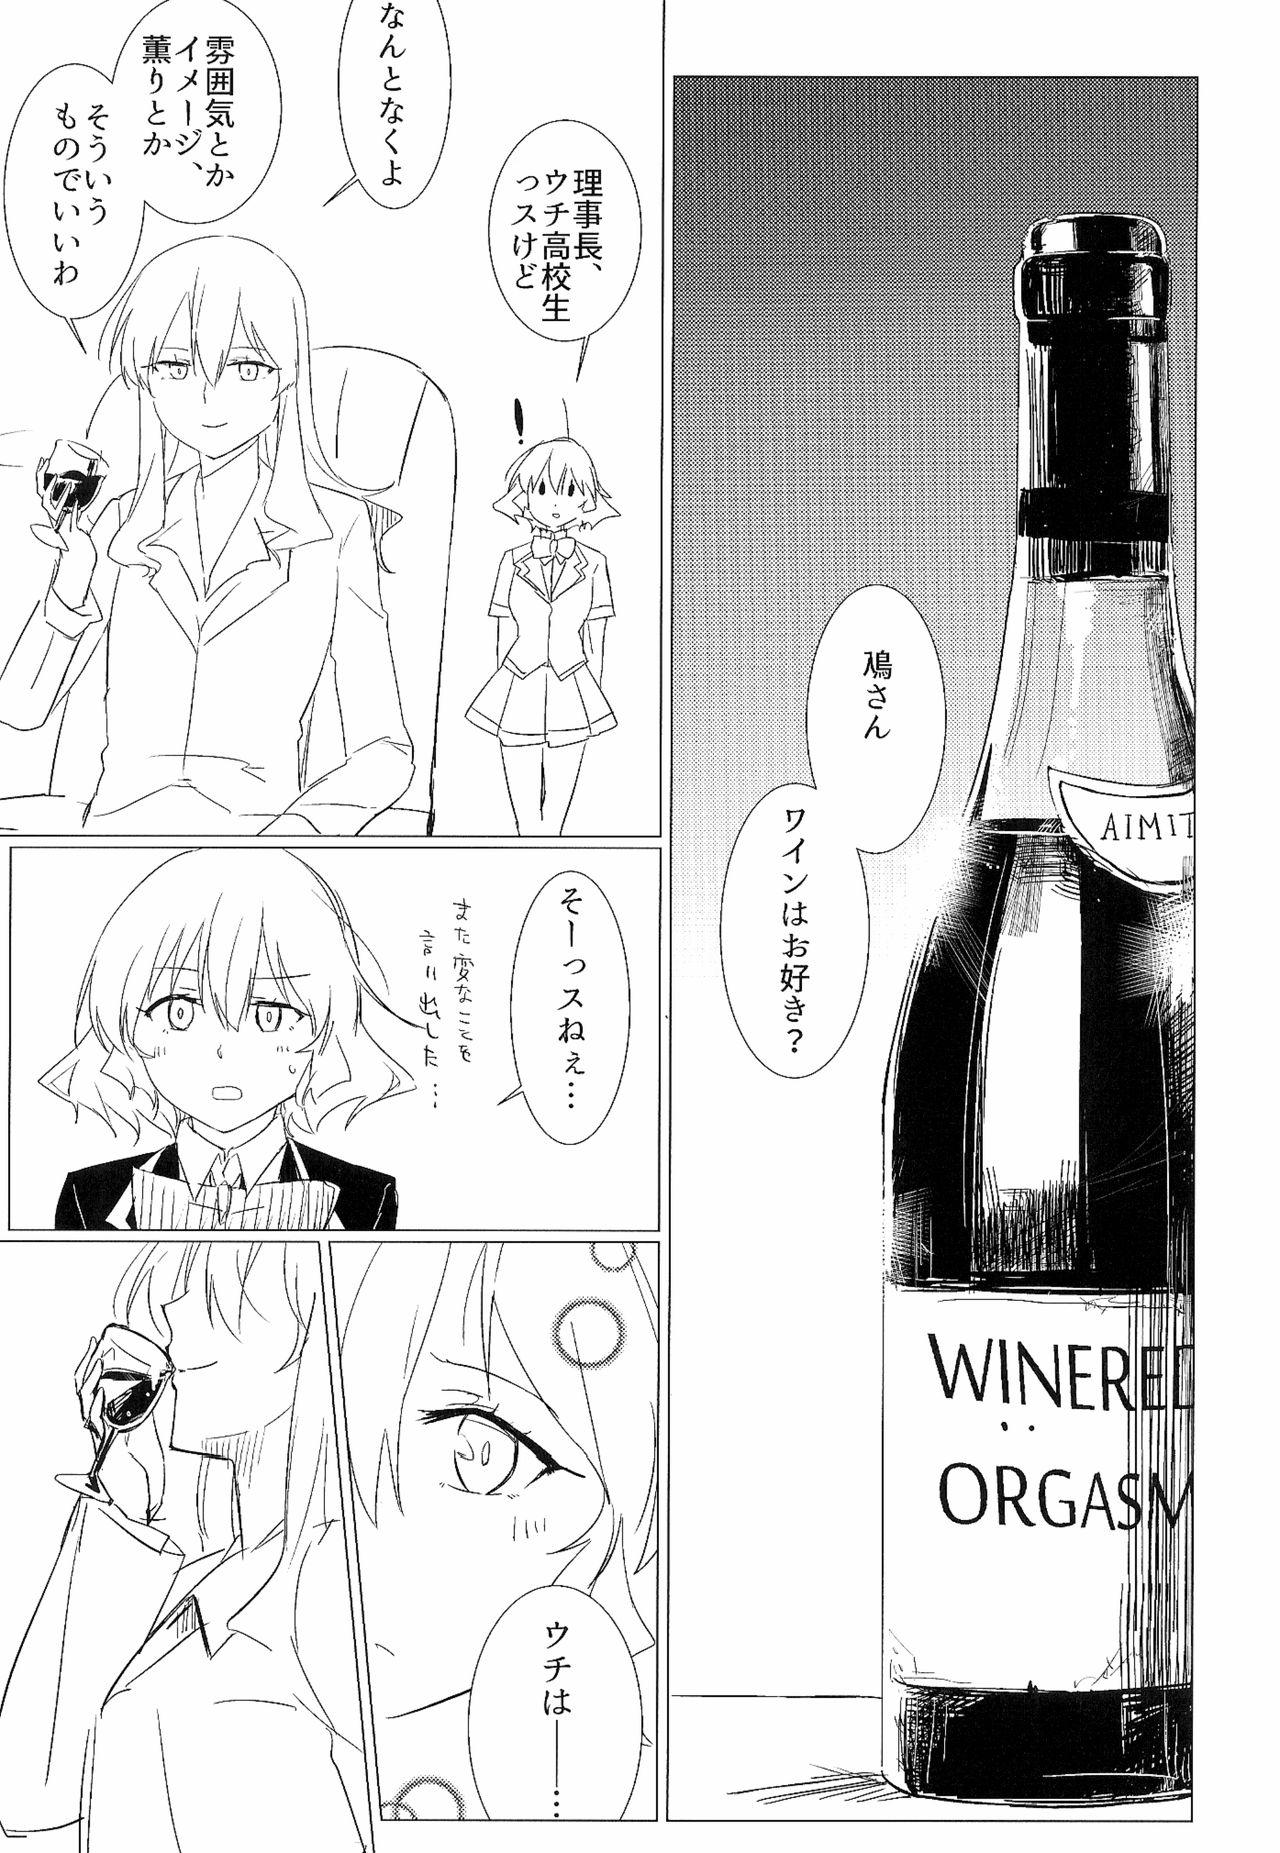 Doggy Wine-Red Orgasm - Akuma no riddle 4some - Page 3